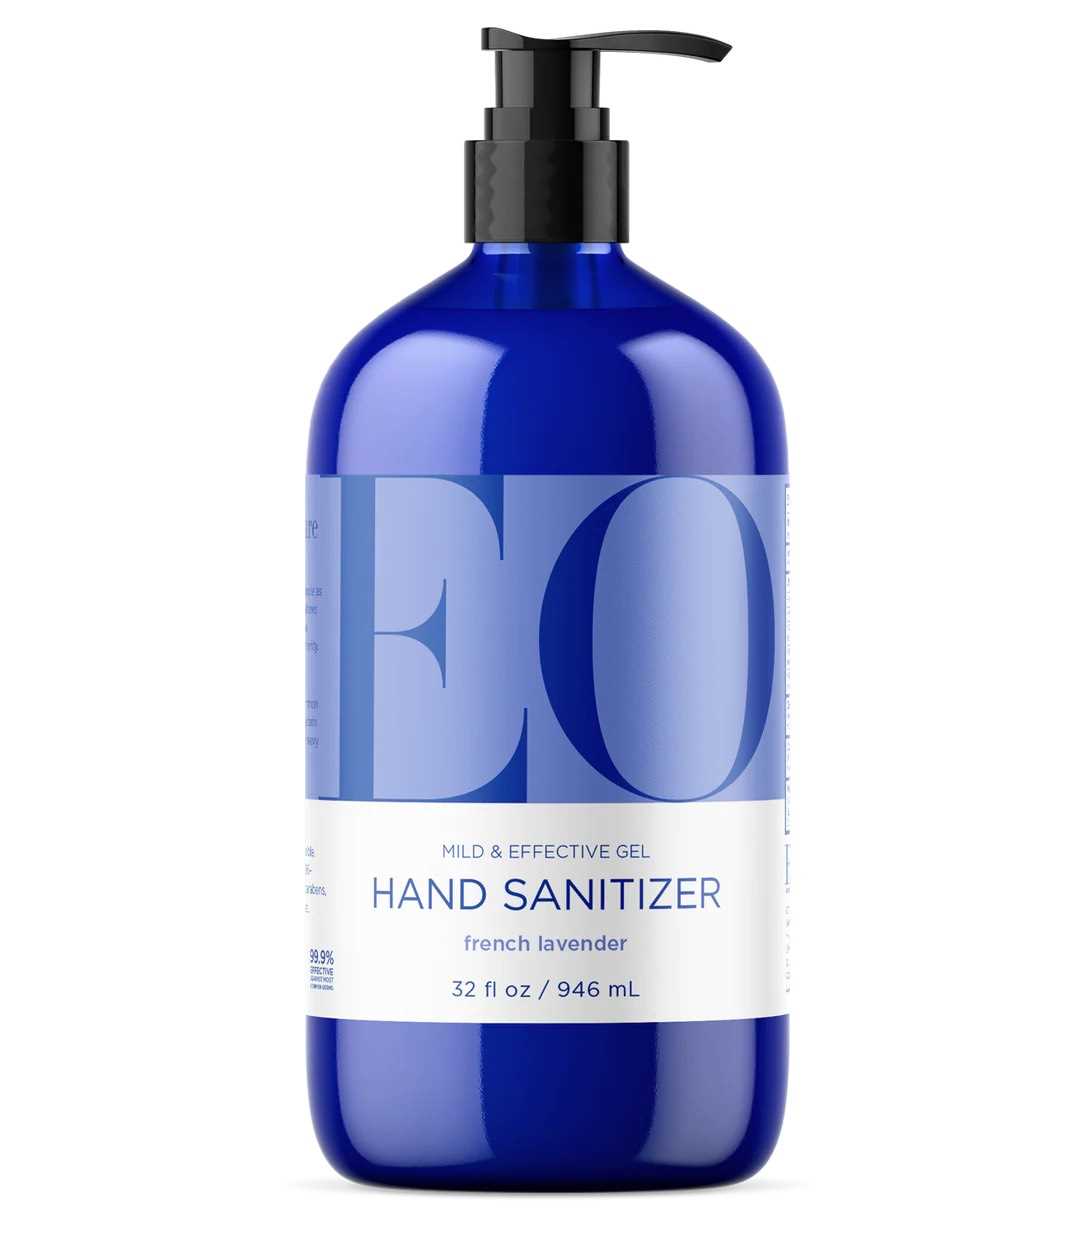 EO Hand Sanitizer Gel, 32 Ounce, French Lavender, Organic Plant-Based, Botanical Extracts